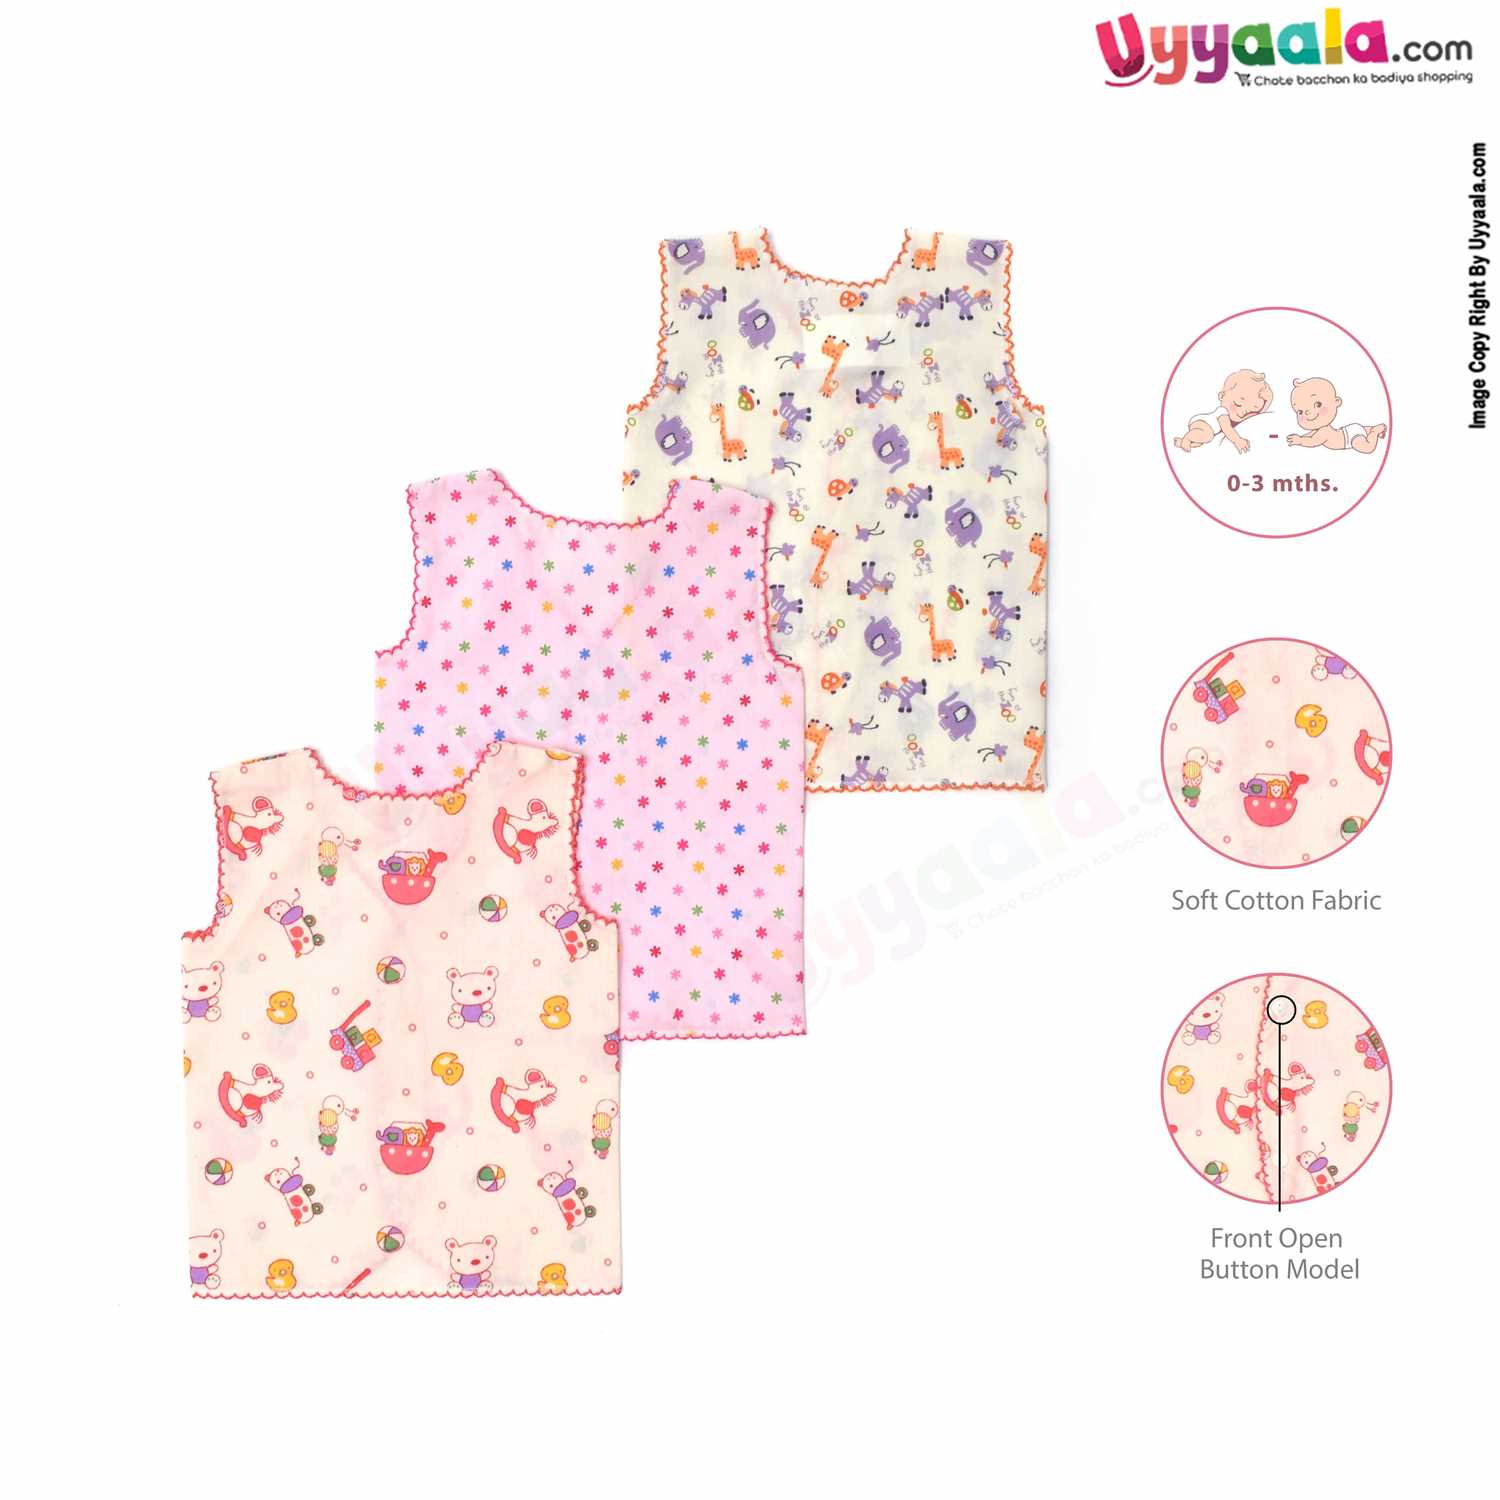 POLAR CUBS Sleeveless Baby Jabla Set, Front Opening Button Model, Premium Quality Cotton Baby Wear, Assorted Prints, (0-3M), 3Pack - Multicolor